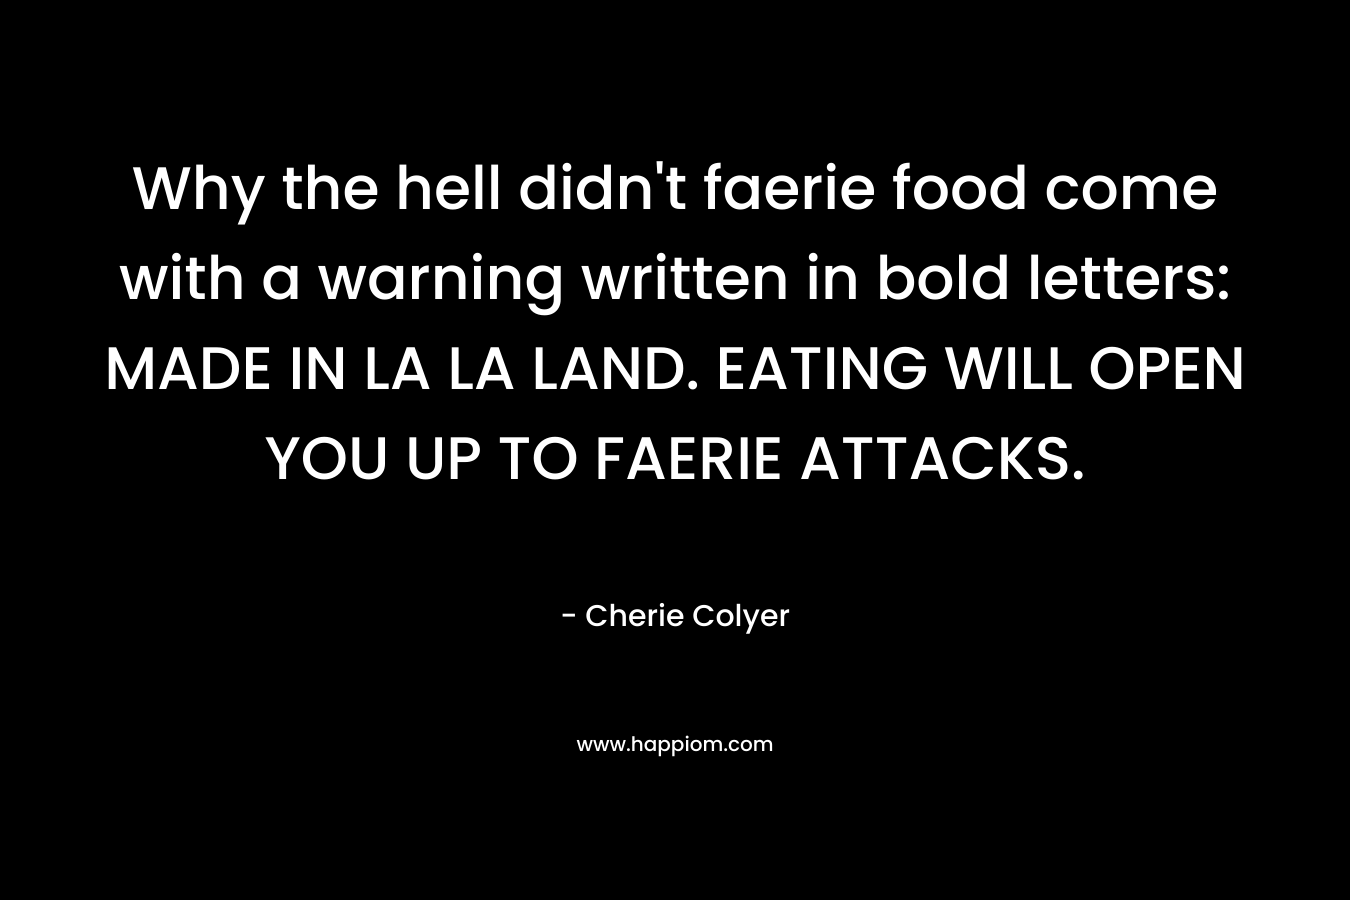 Why the hell didn’t faerie food come with a warning written in bold letters: MADE IN LA LA LAND. EATING WILL OPEN YOU UP TO FAERIE ATTACKS. – Cherie Colyer